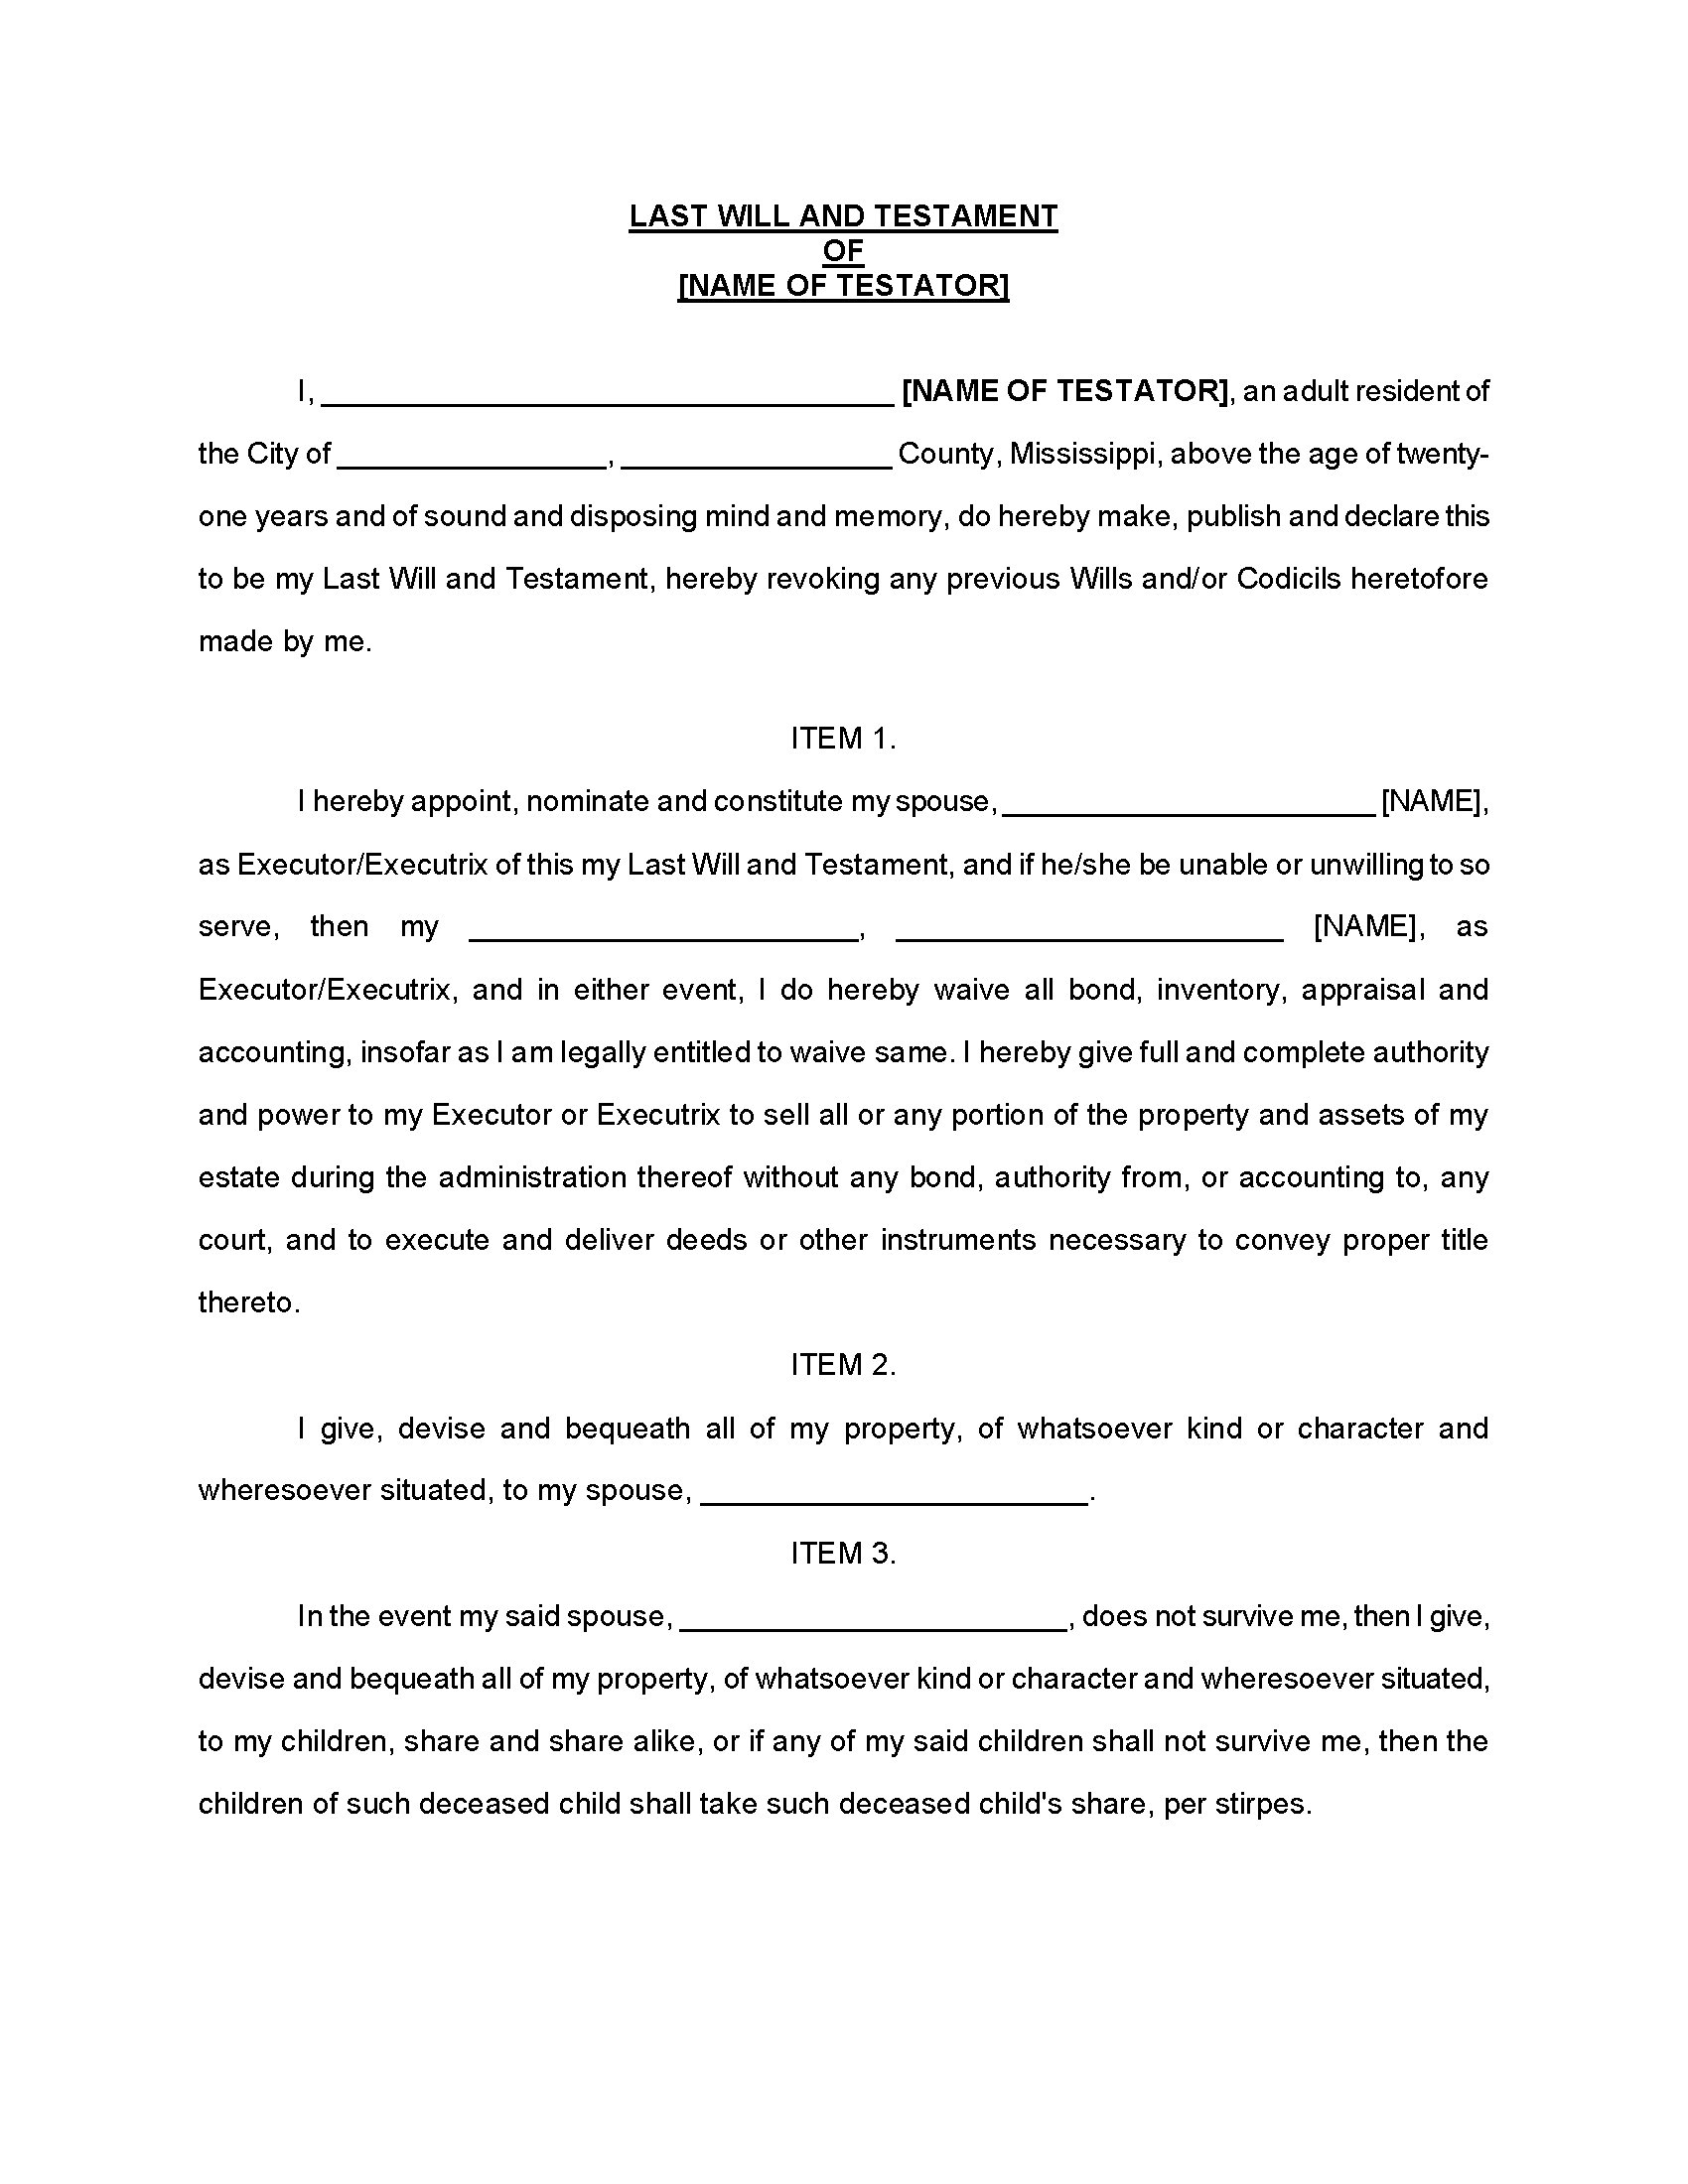 mississippi-simple-last-will-testament-legal-forms-and-business-templates-megadox